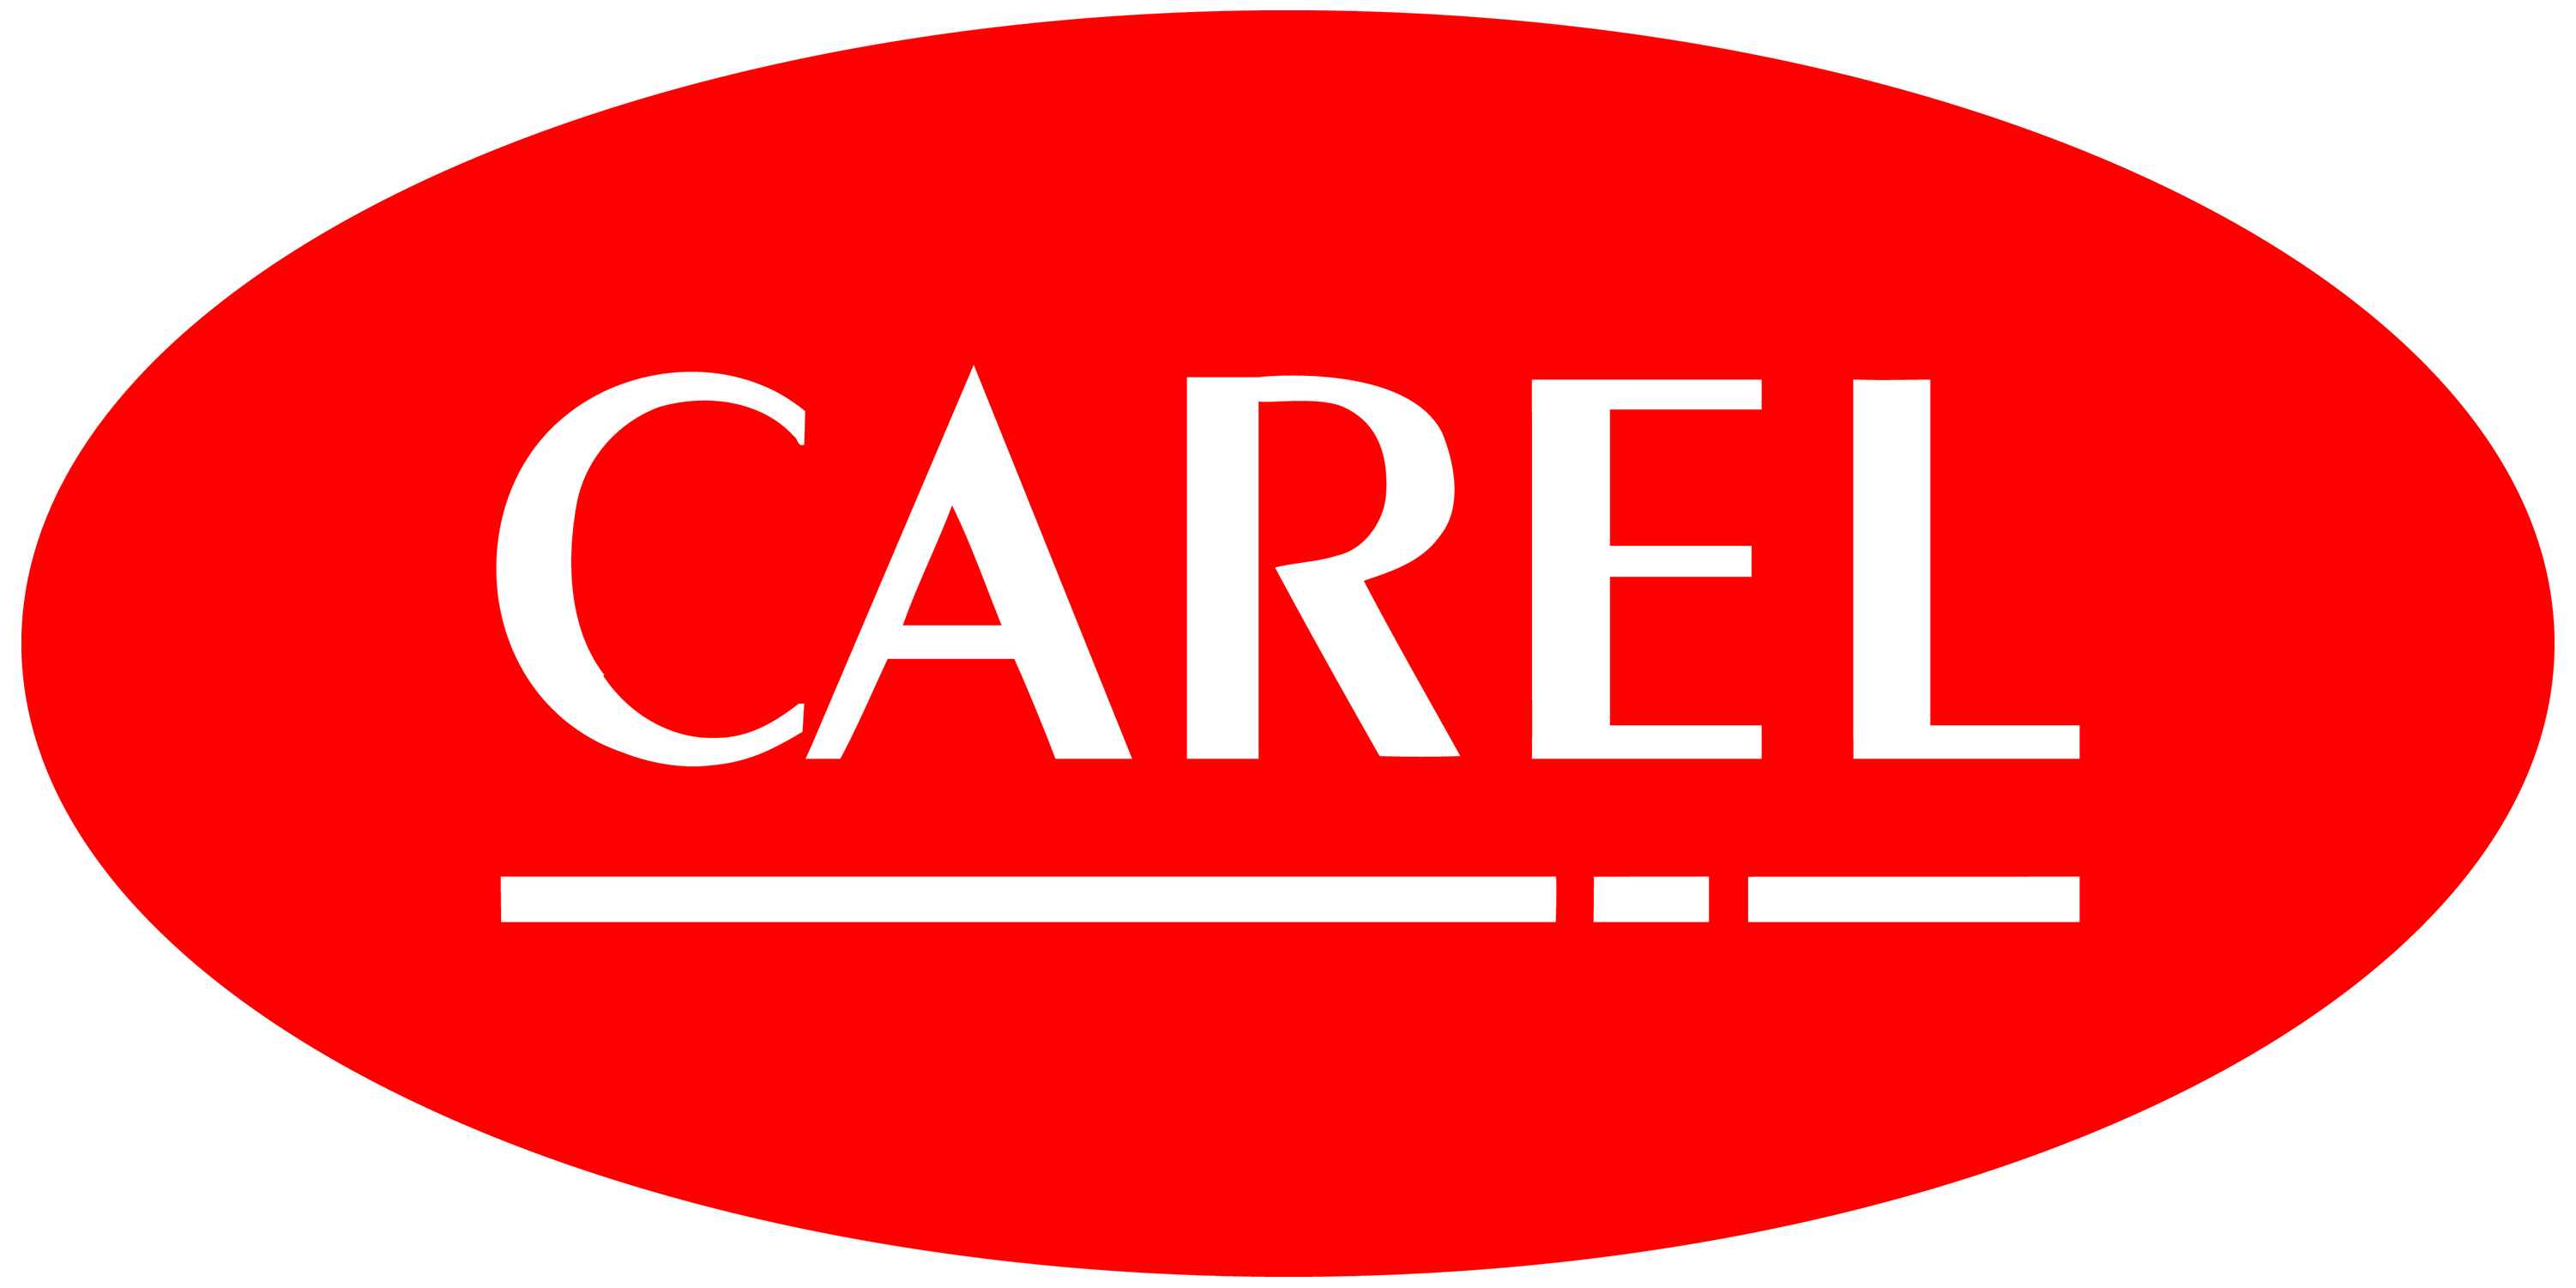 CAREL - Career Days and Events